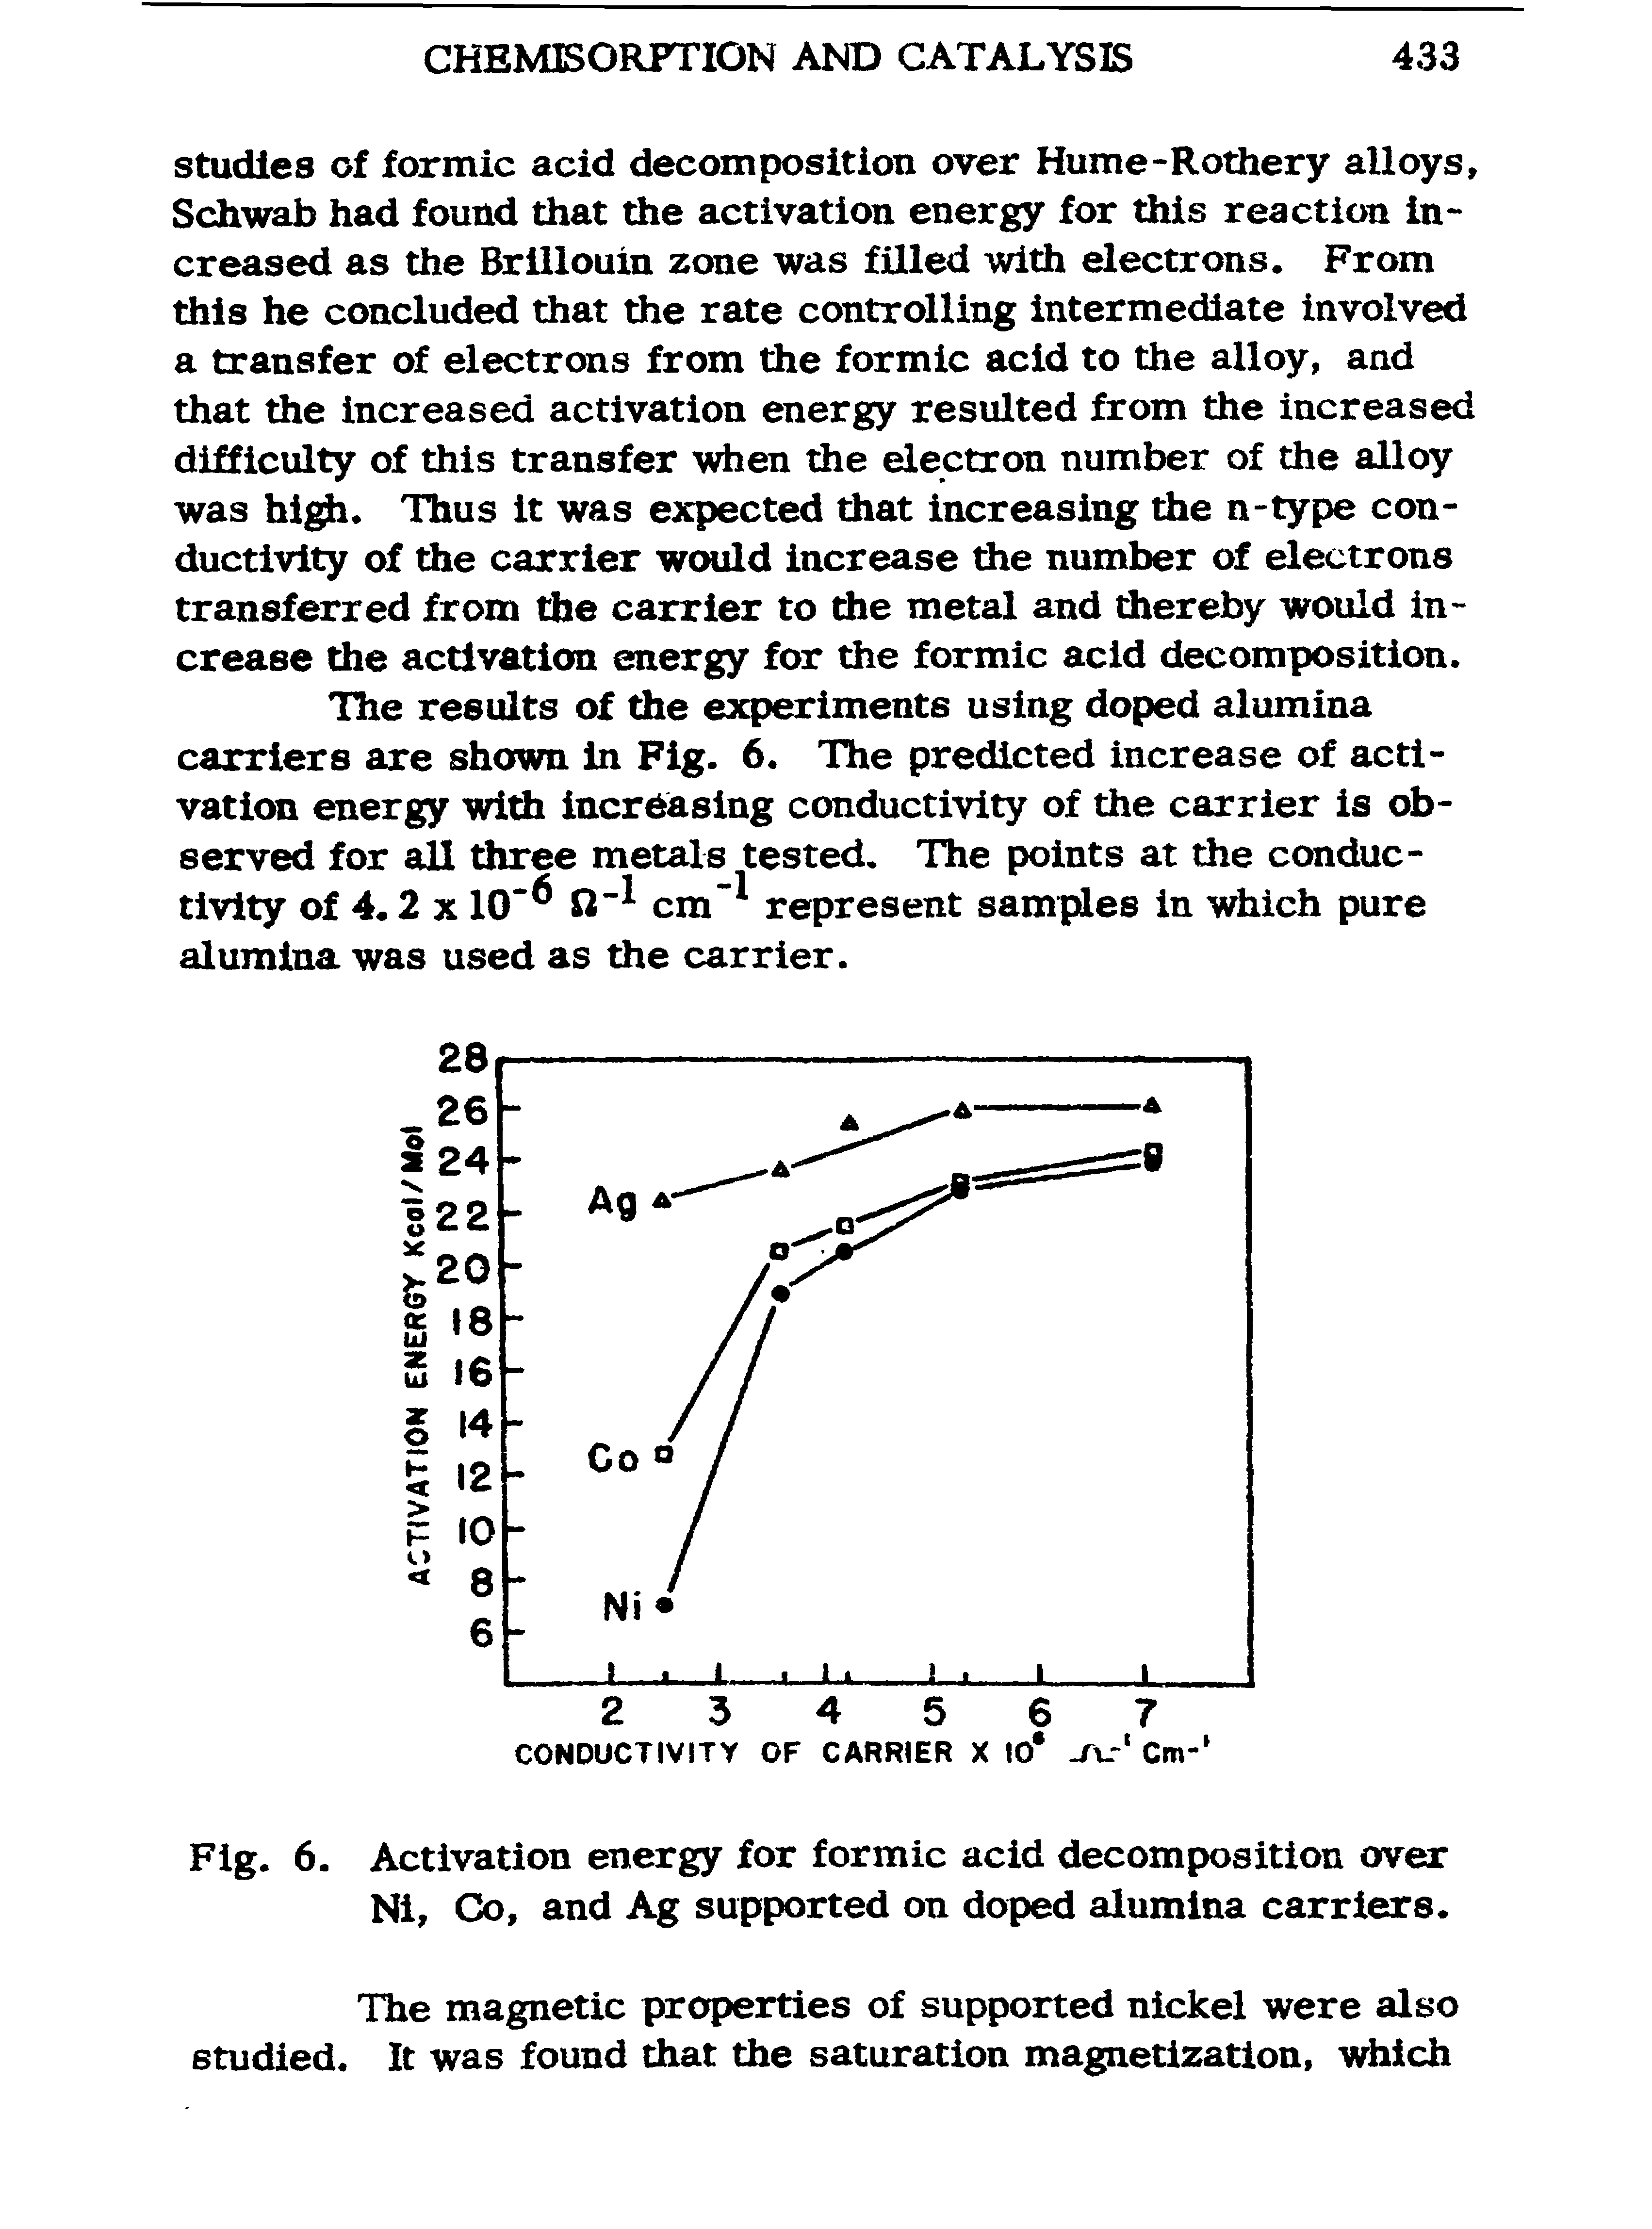 Fig. 6. Activation energy for formic acid decomposition over Ni, Co, and Ag supported on doped alumina carriers.